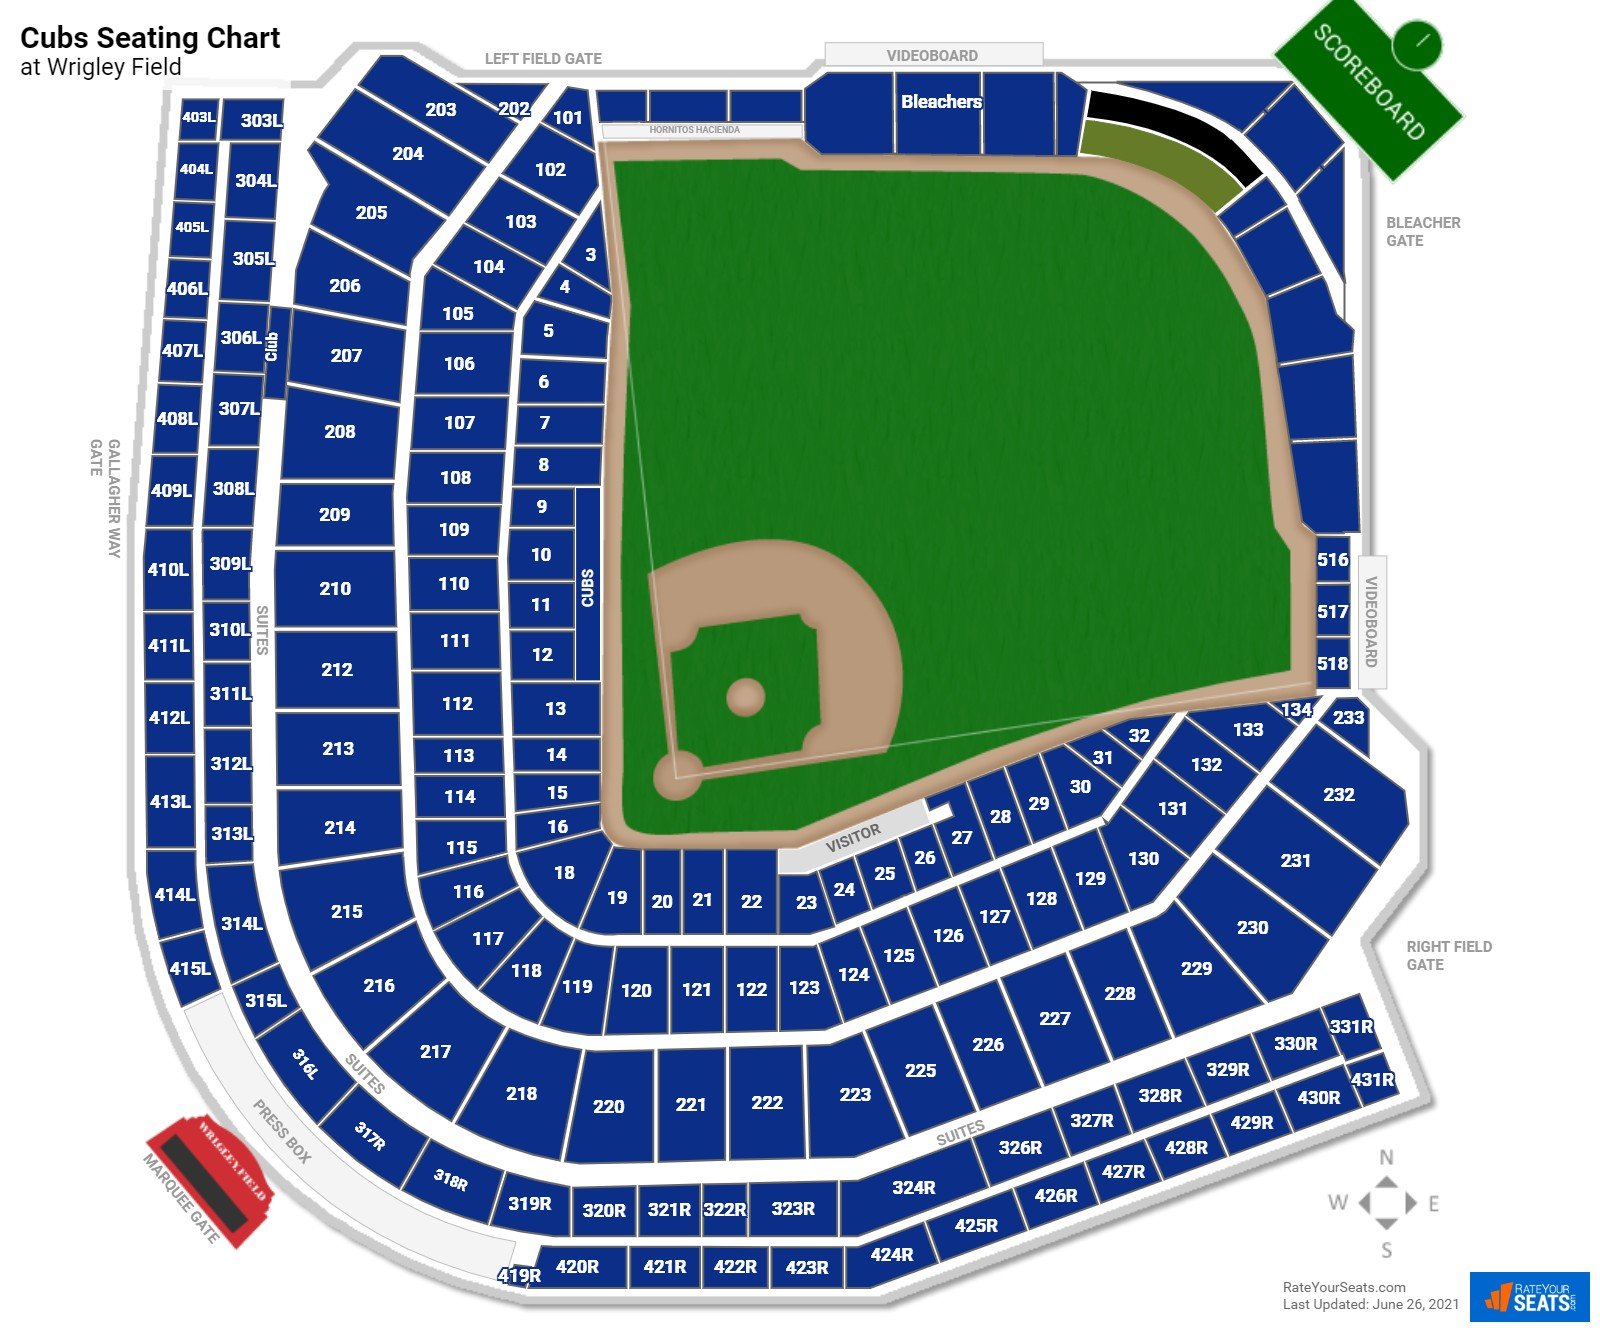 Chicago Cubs Seating Chart at Wrigley Field